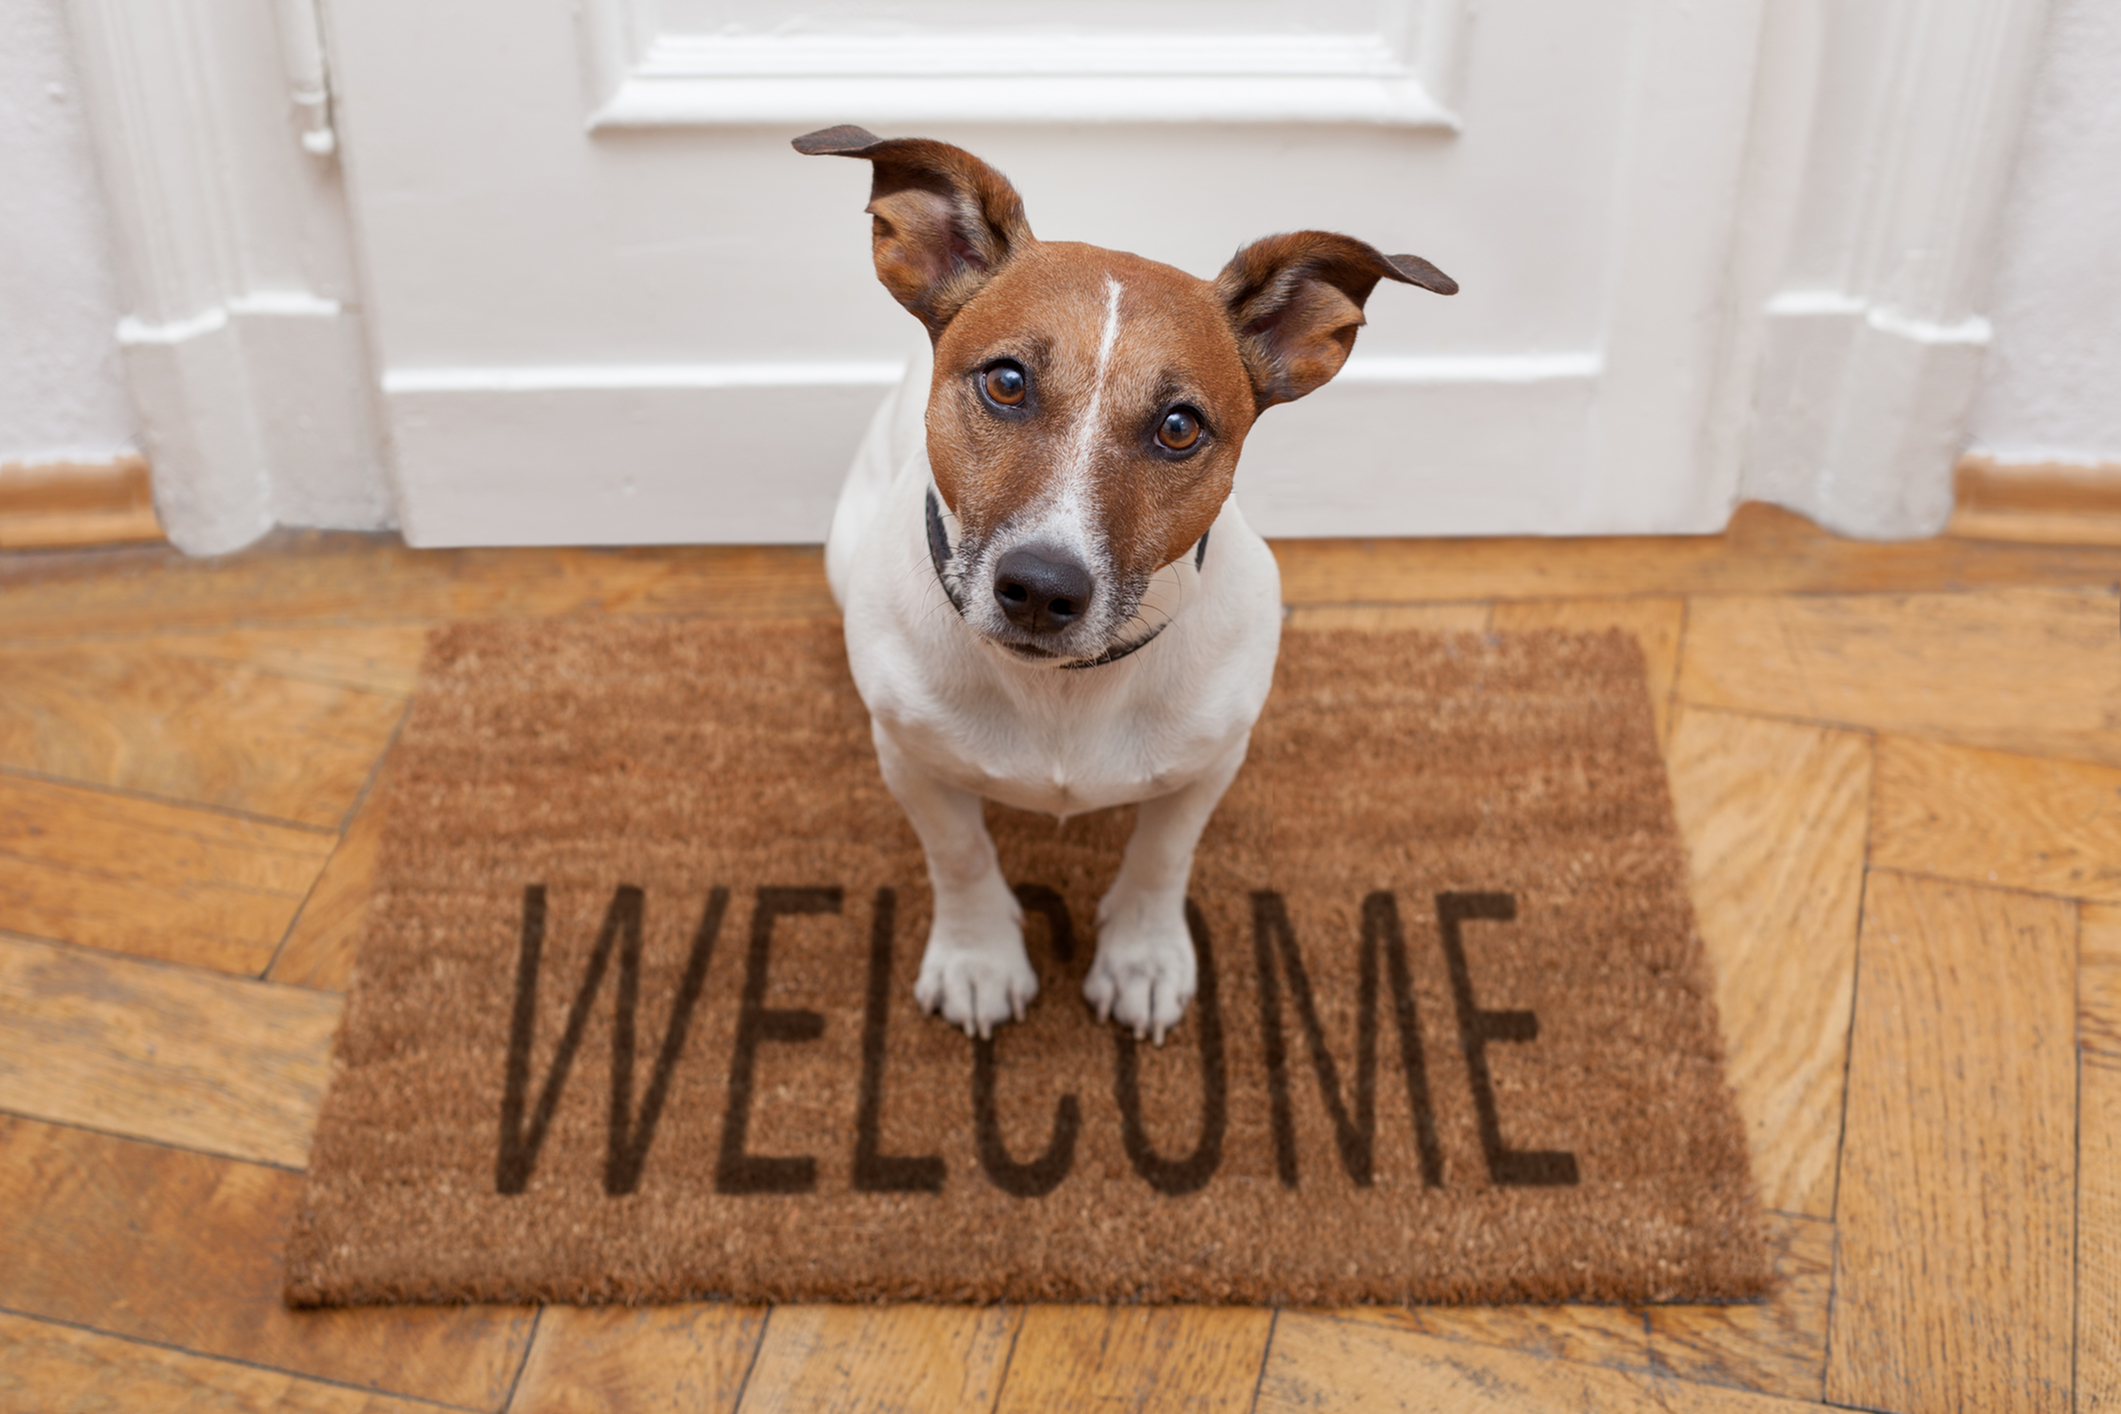 SIX STEPS TO PROTECT YOUR MULTIFAMILY ASSETS FROM PET LIABILITY